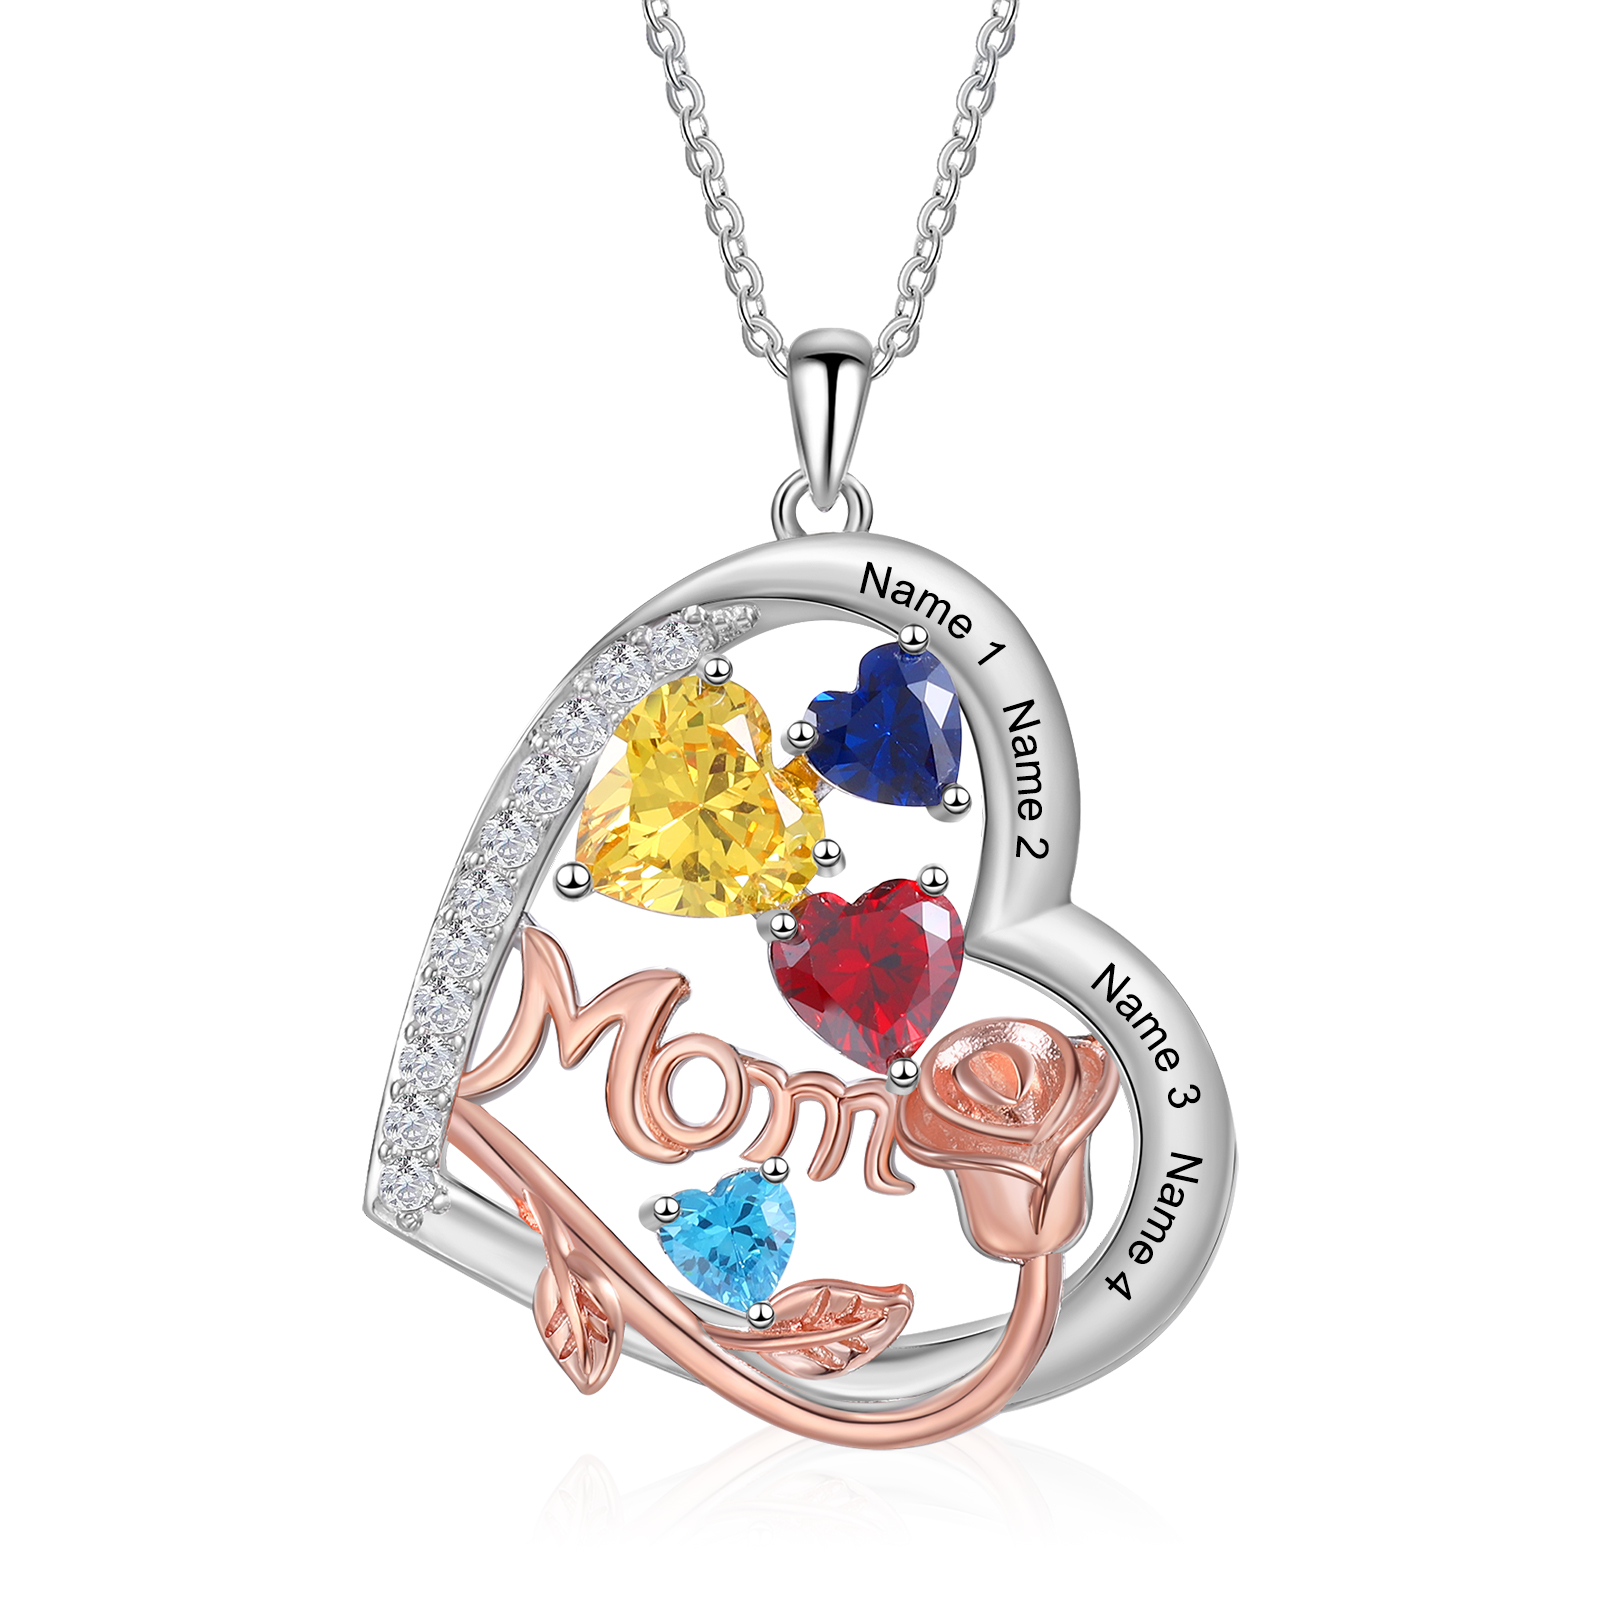 Name - Personalized Silver Heart Necklace with Birthstone and Name as 